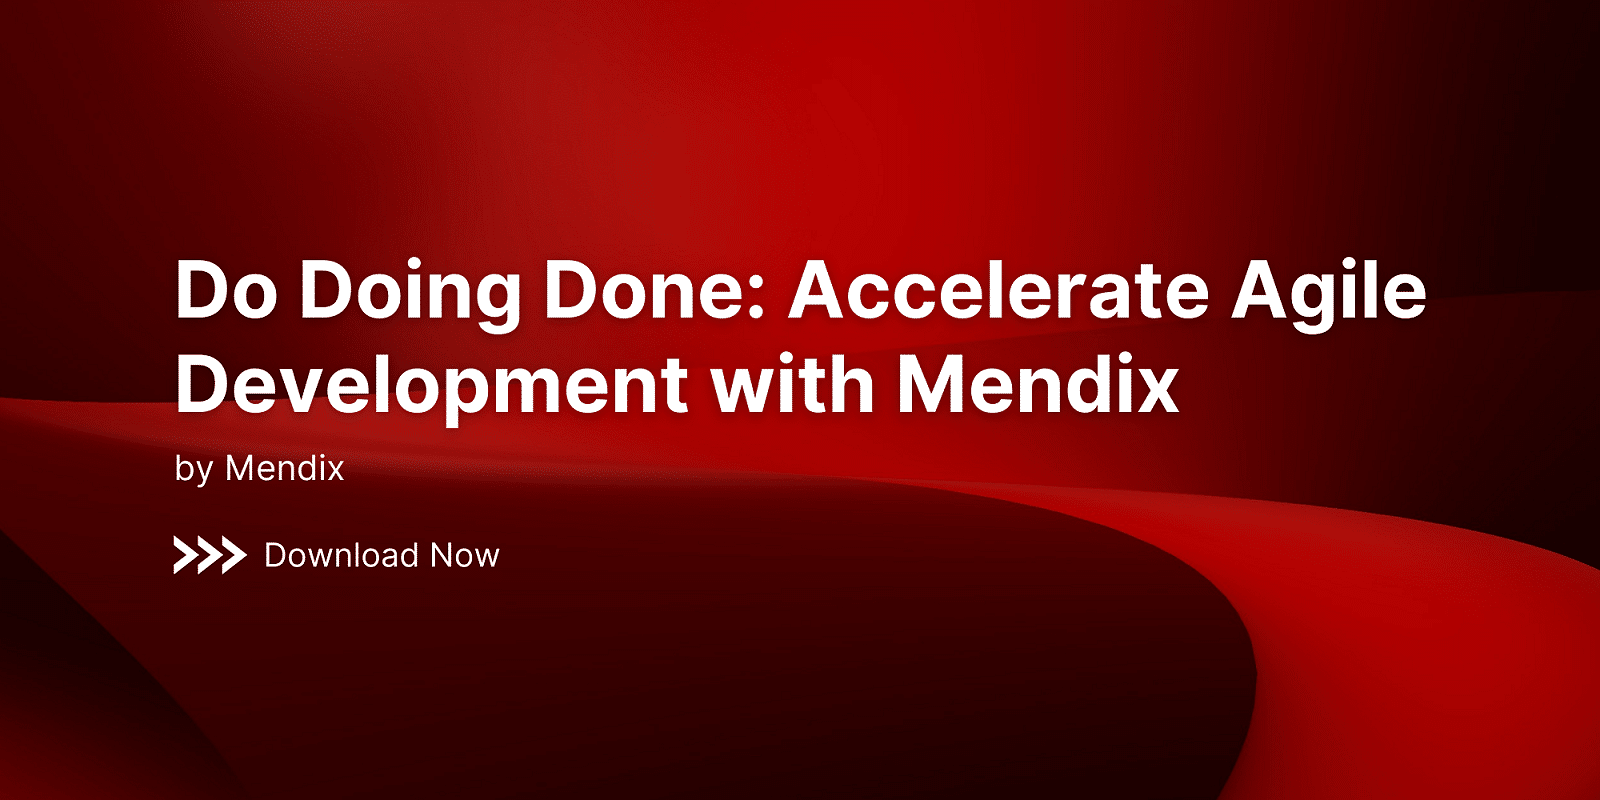 Do Doing Done Accelerate Agile Development with Mendix